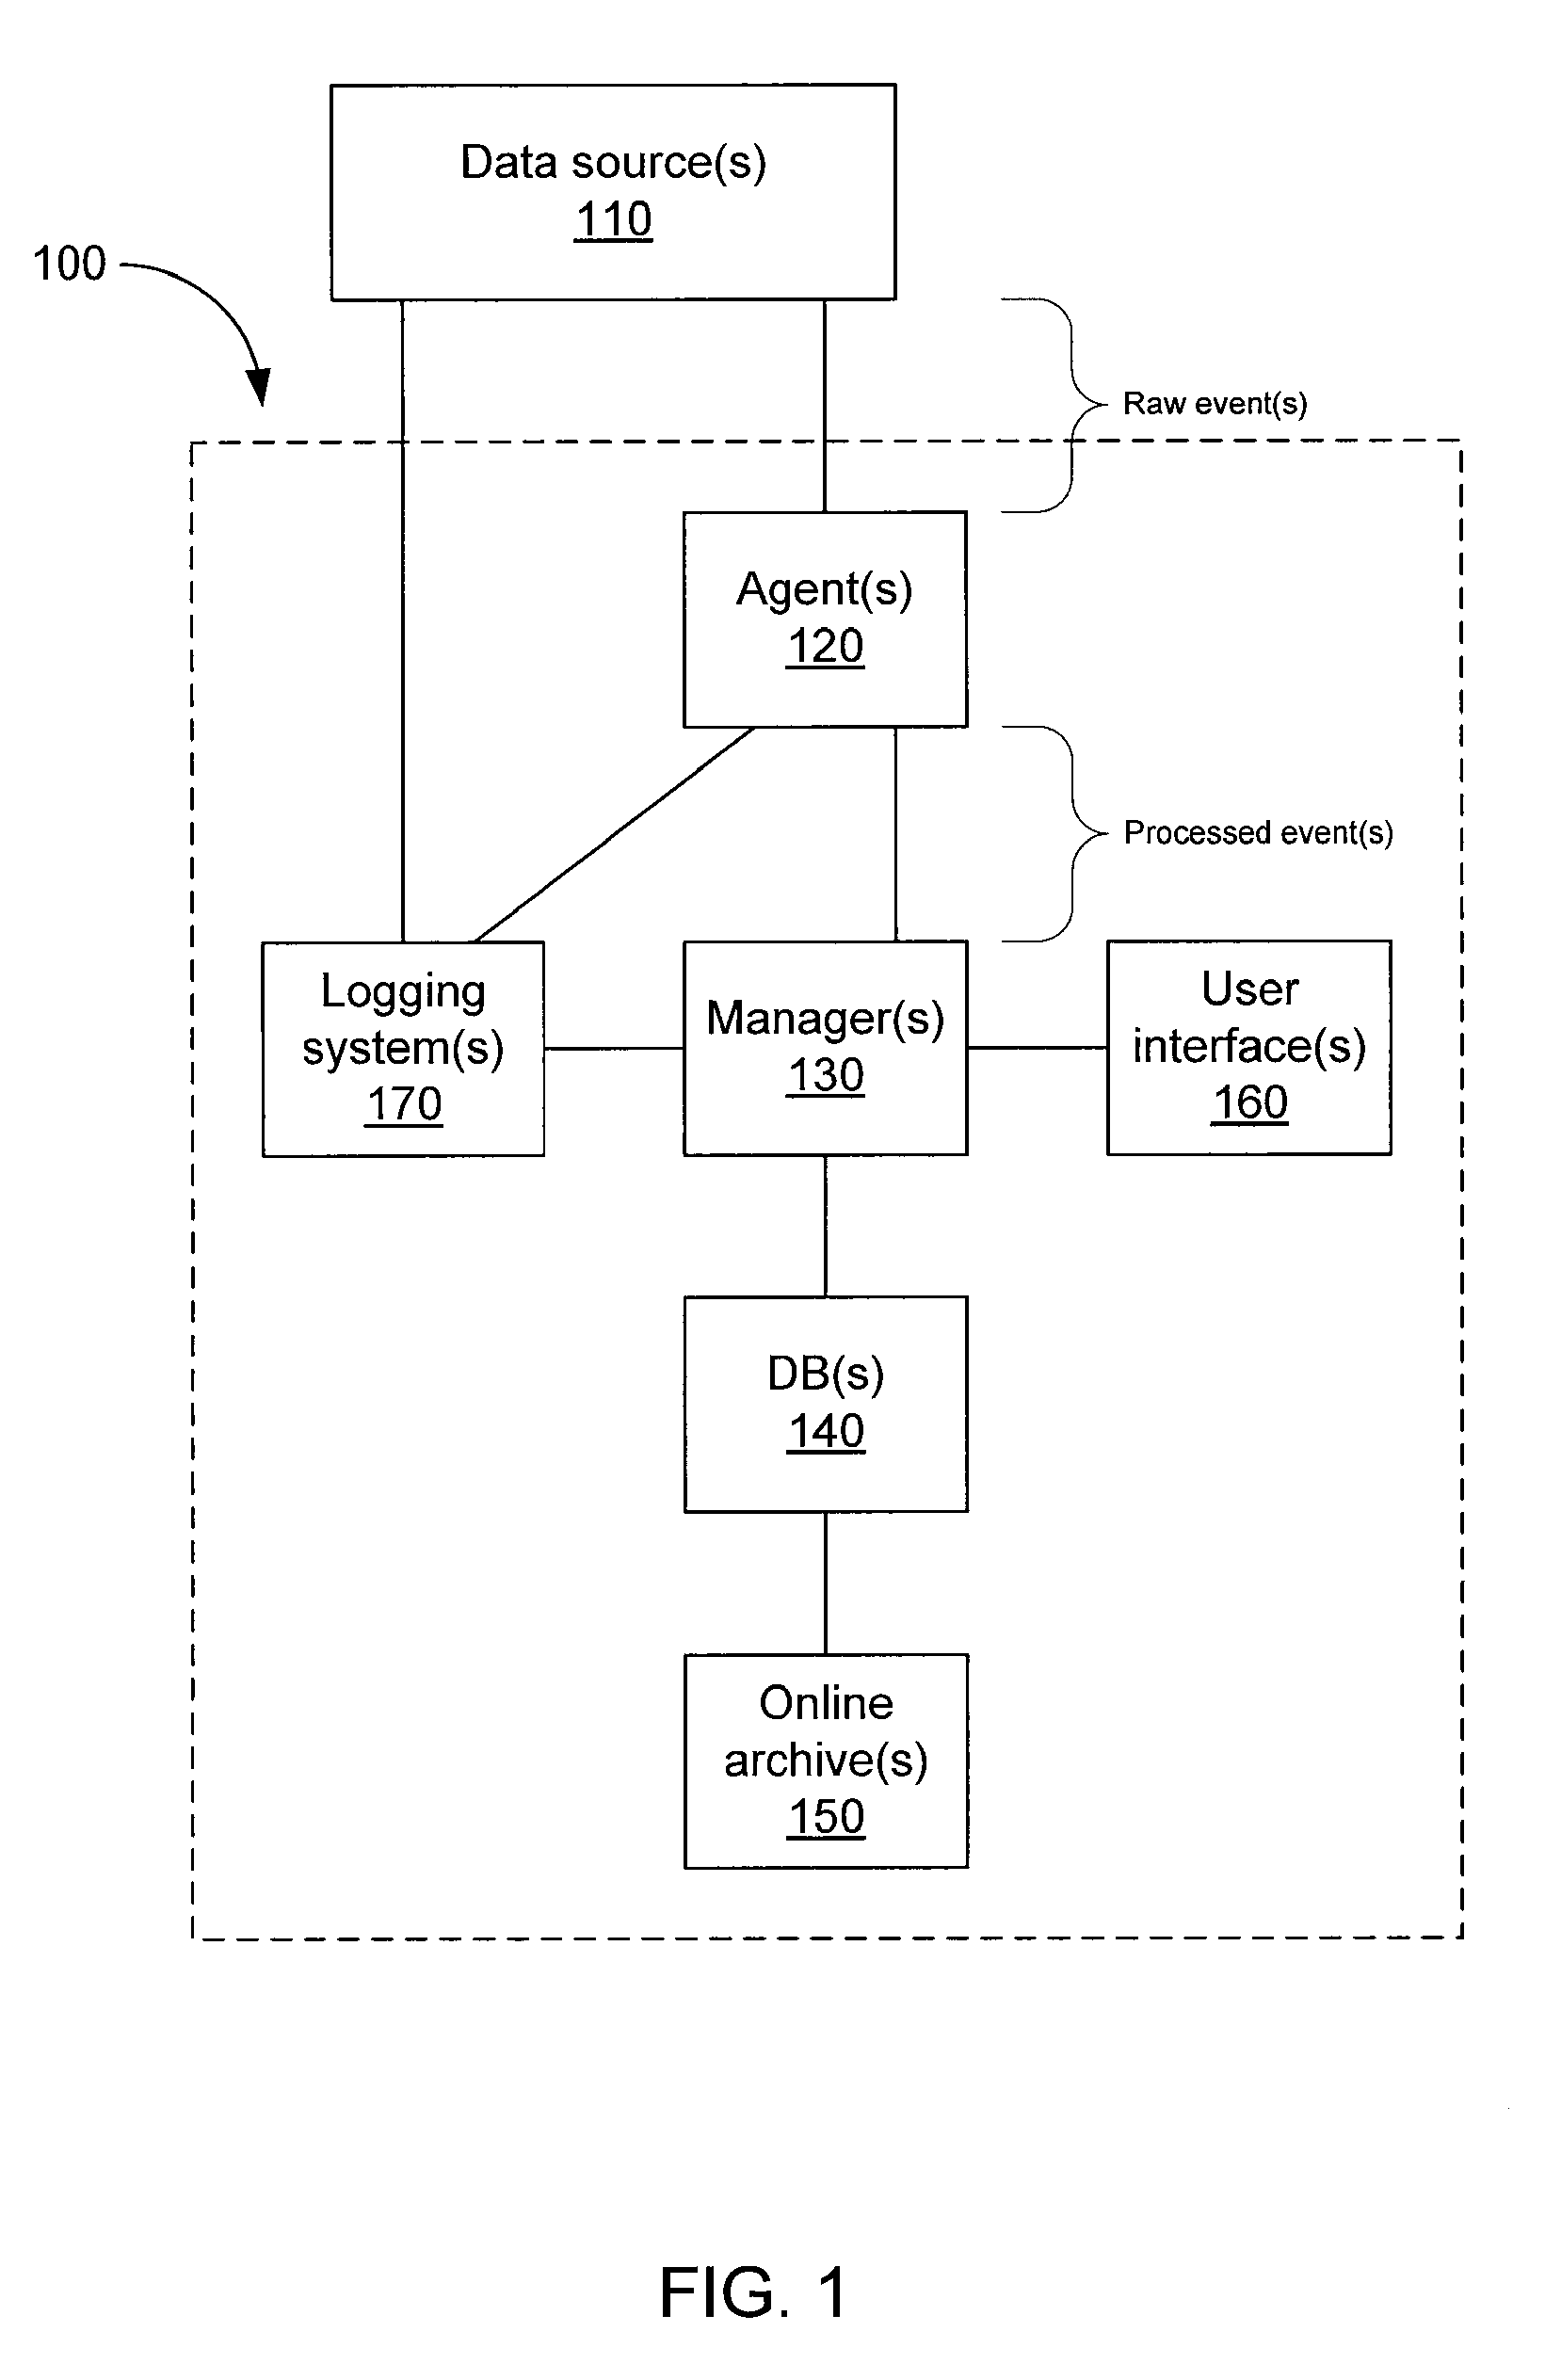 Storing log data efficiently while supporting querying to assist in computer network security